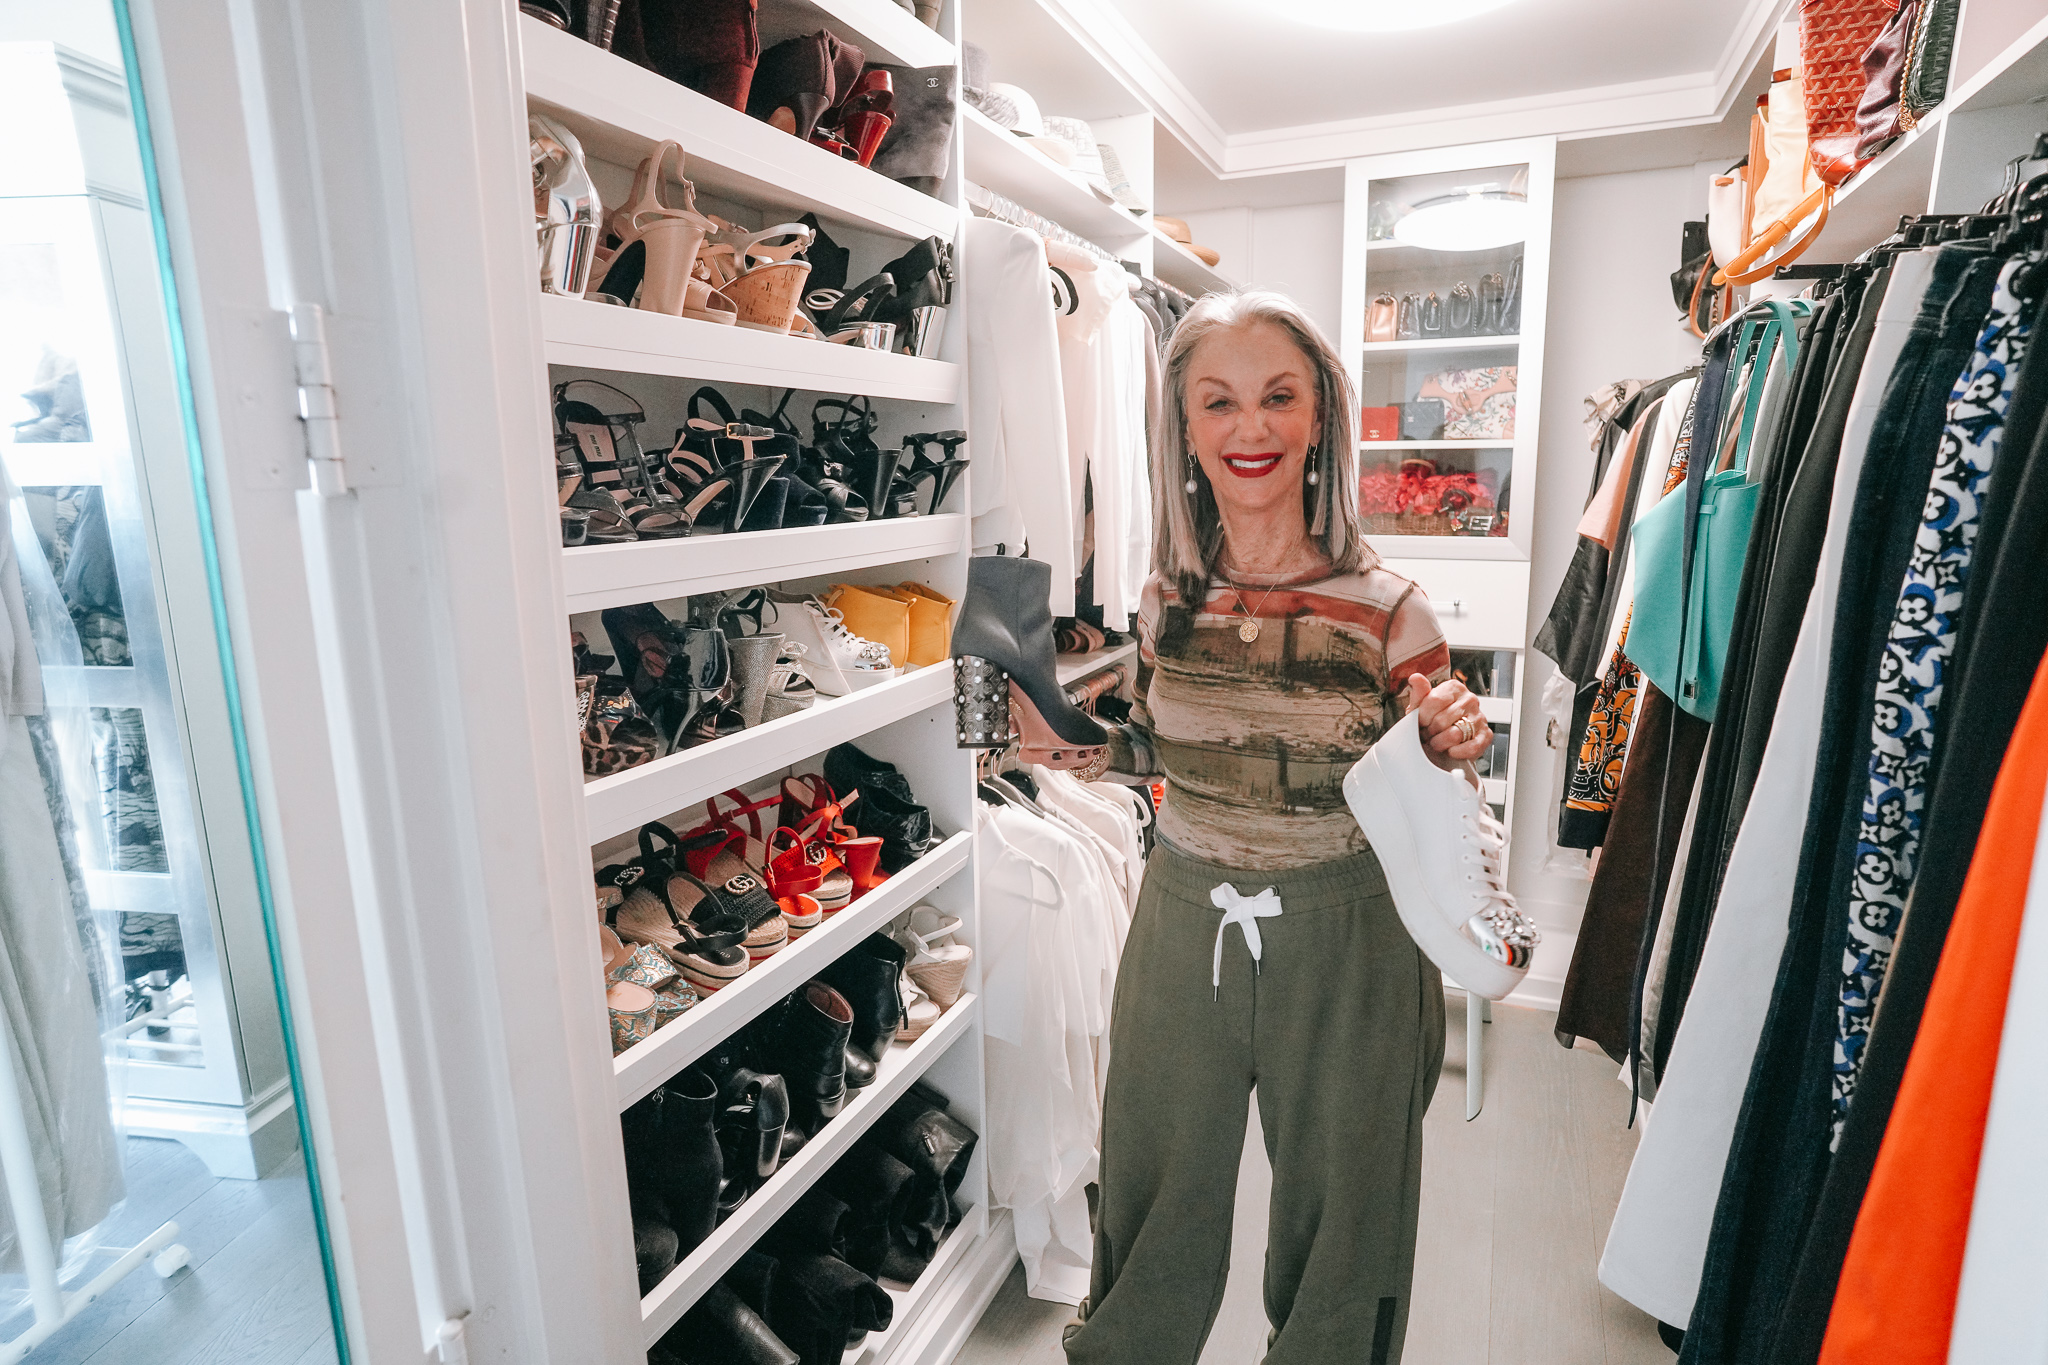 Honey Good holding shoes that every woman over 50 needs to own in her closet